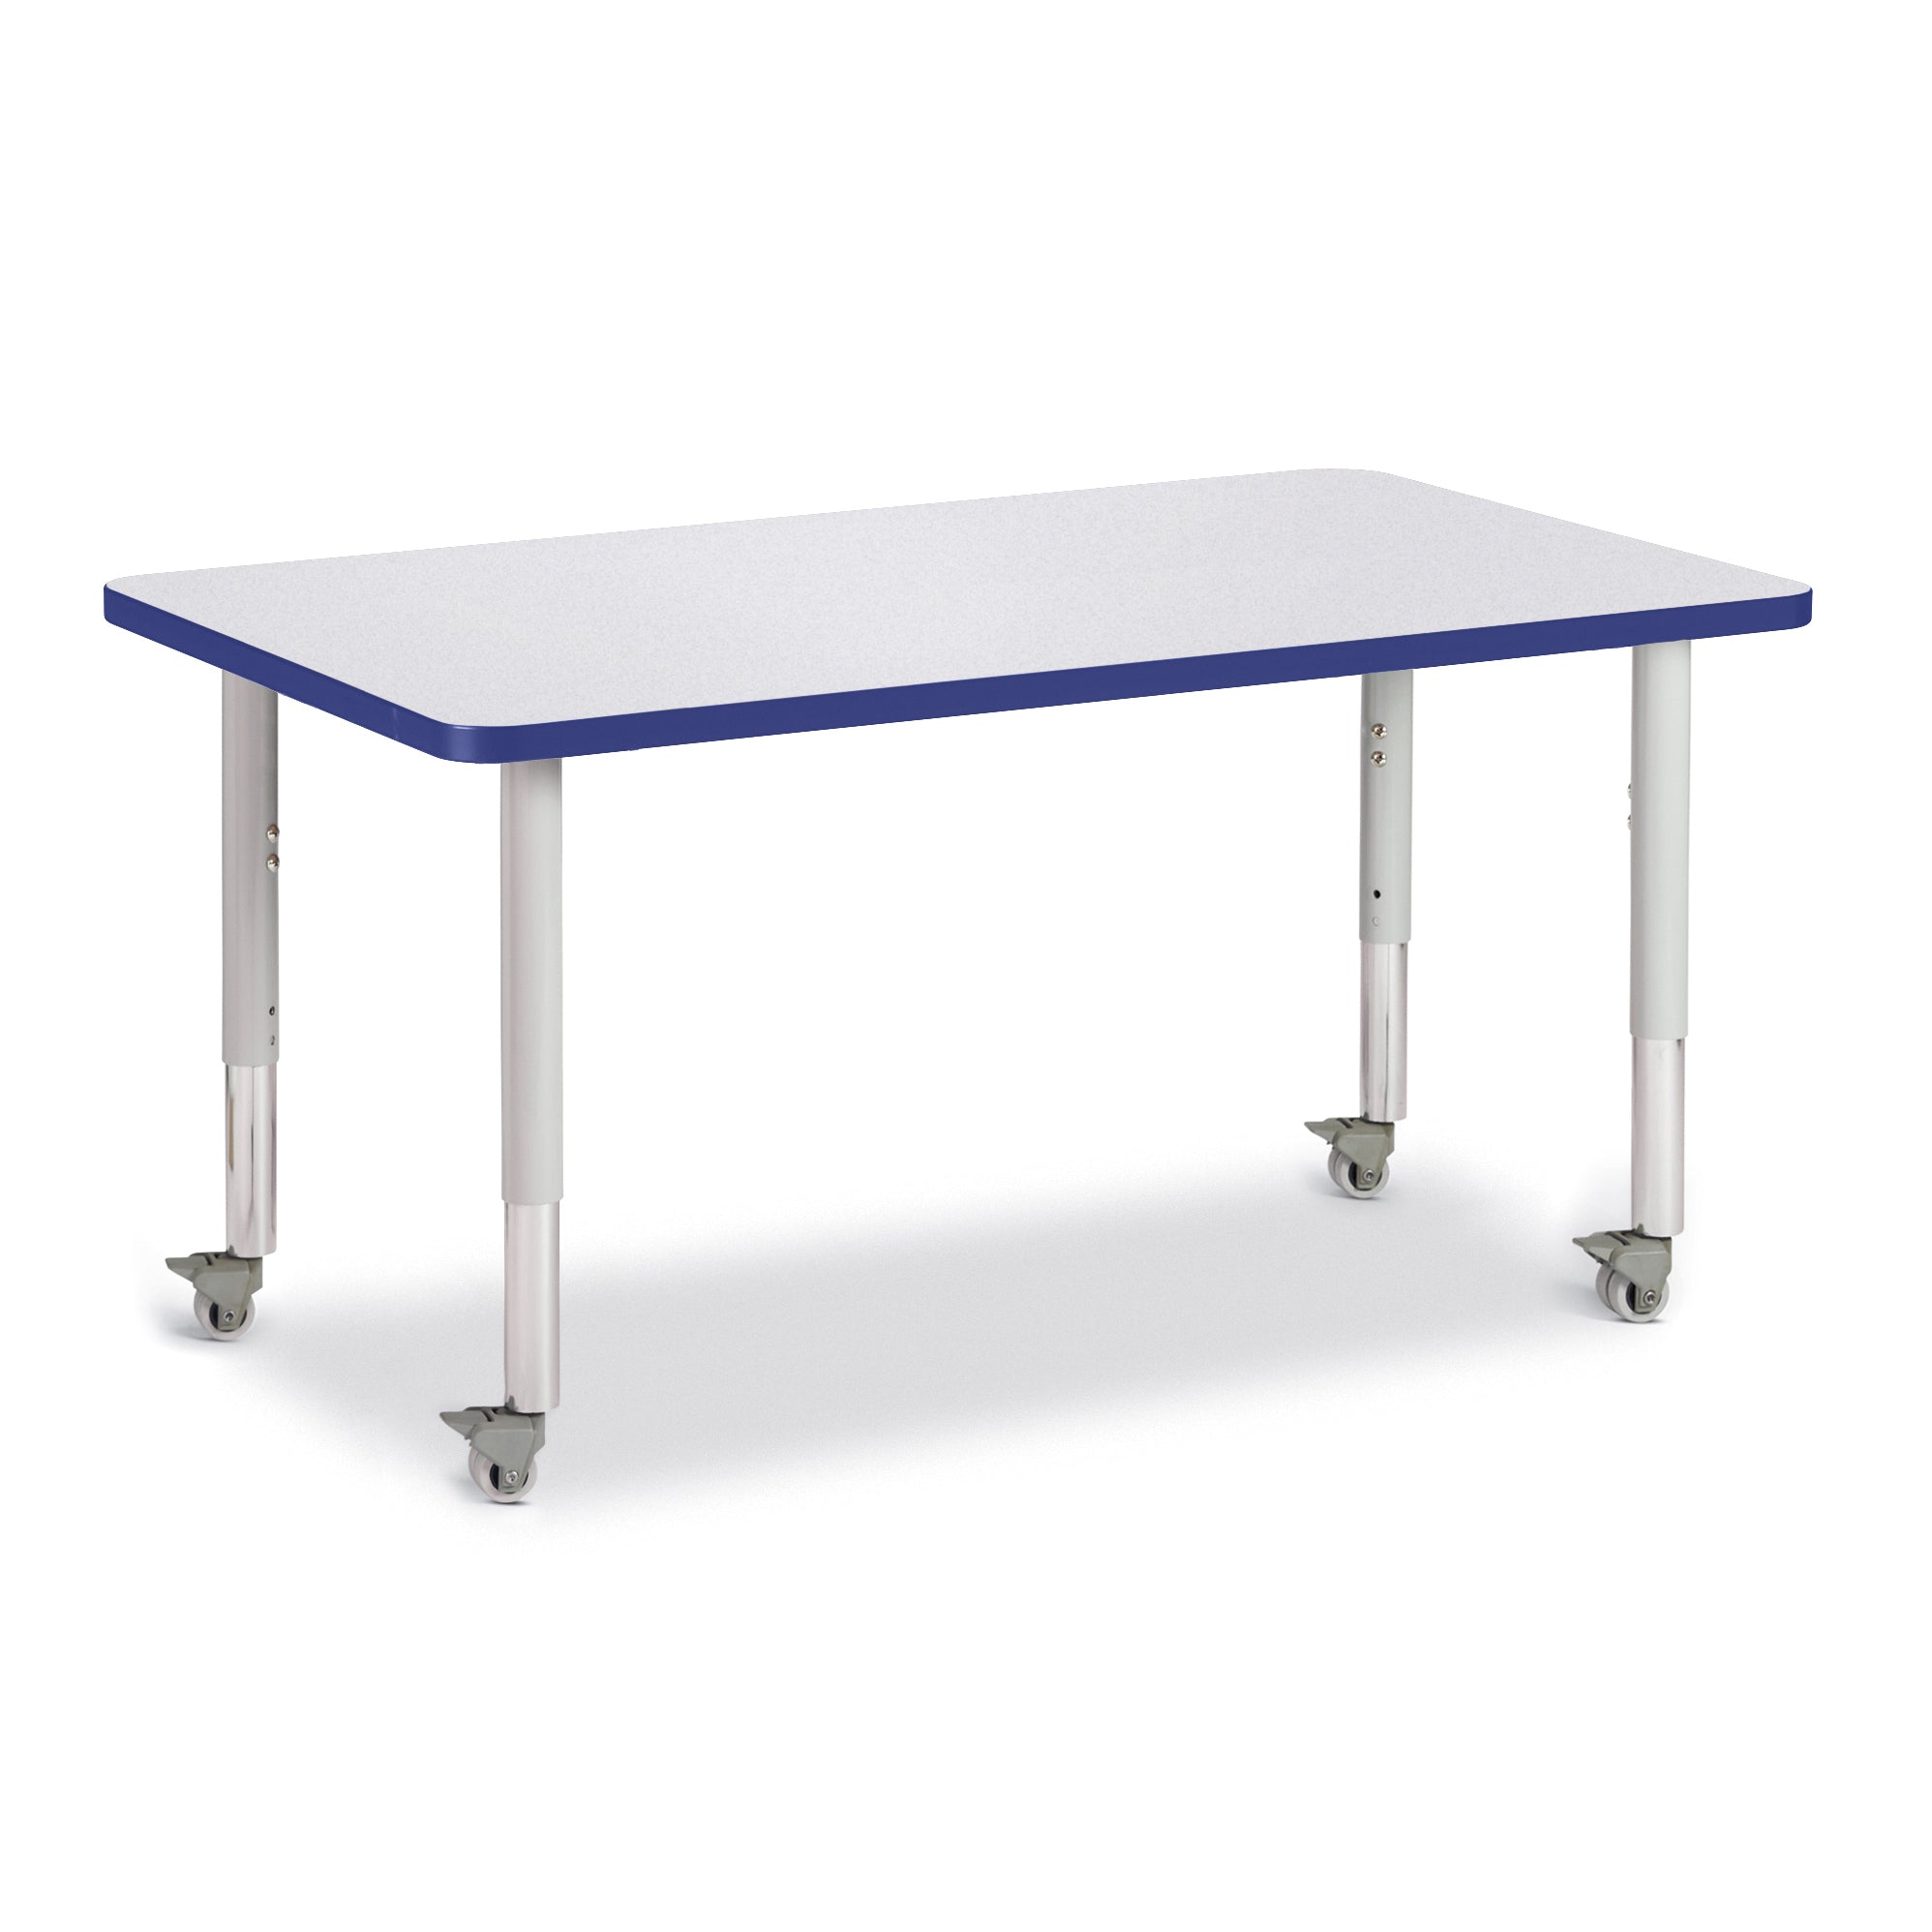 6473JCM003, Berries Rectangle Activity Table - 30" X 48", Mobile - Freckled Gray/Blue/Gray